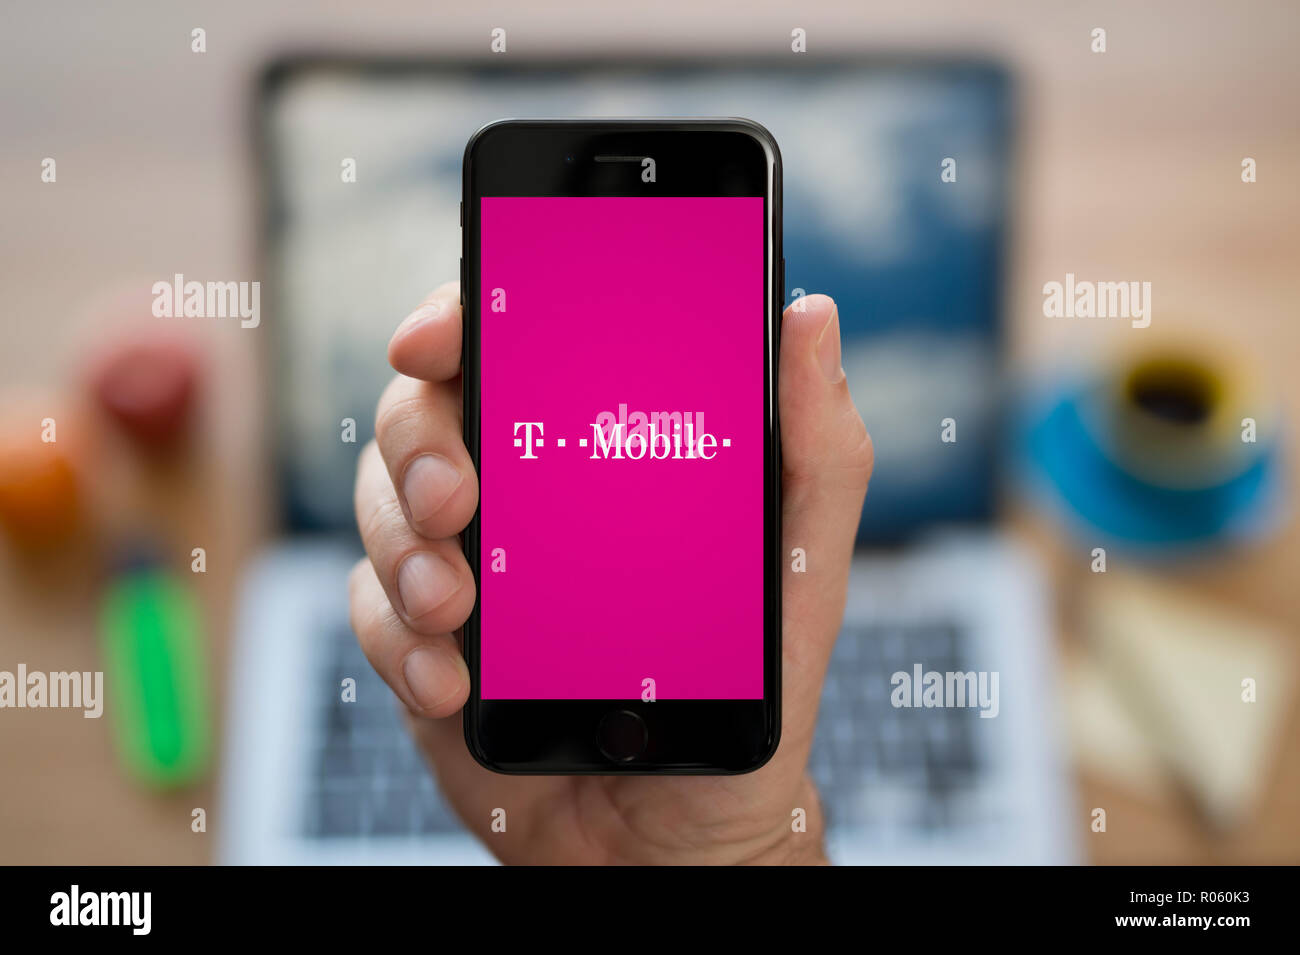 A Man Looks At His Iphone Which Displays The T Mobile Logo While